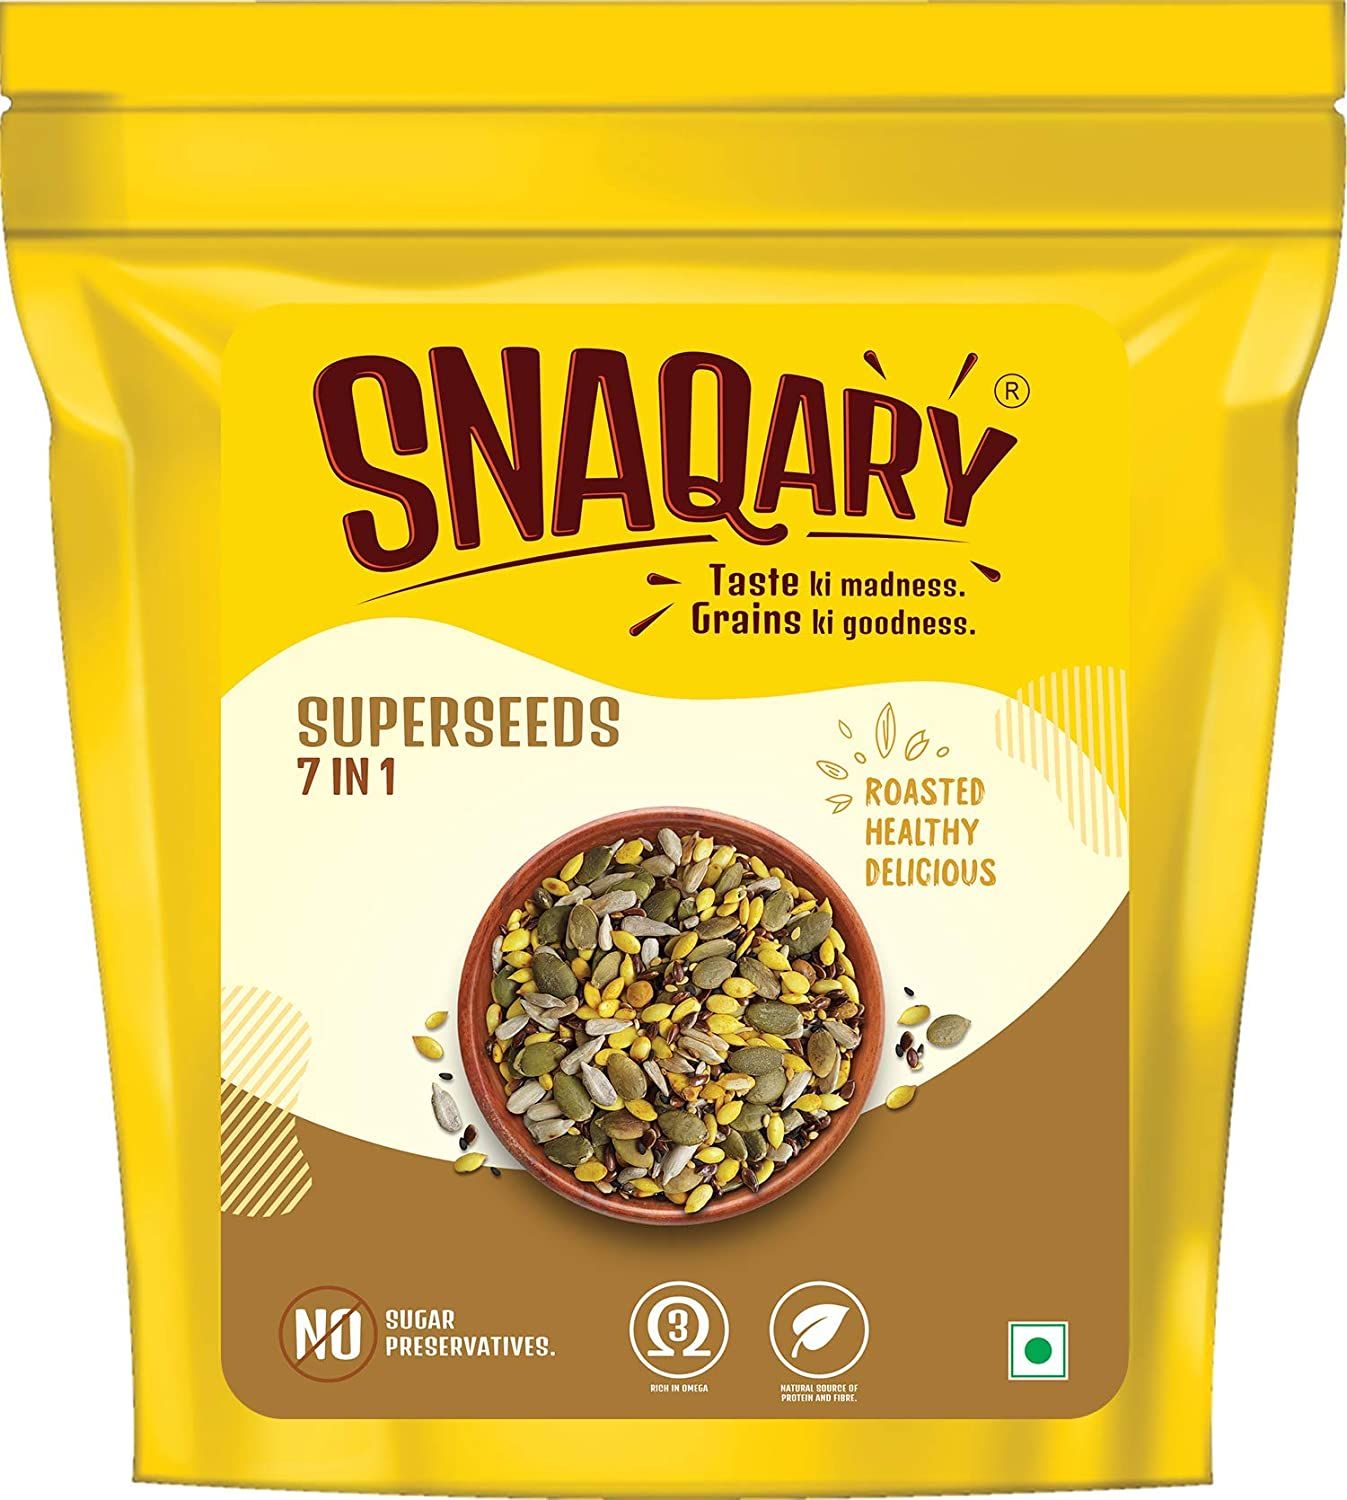 Snaqary Super Seeds 7 IN 1 Image